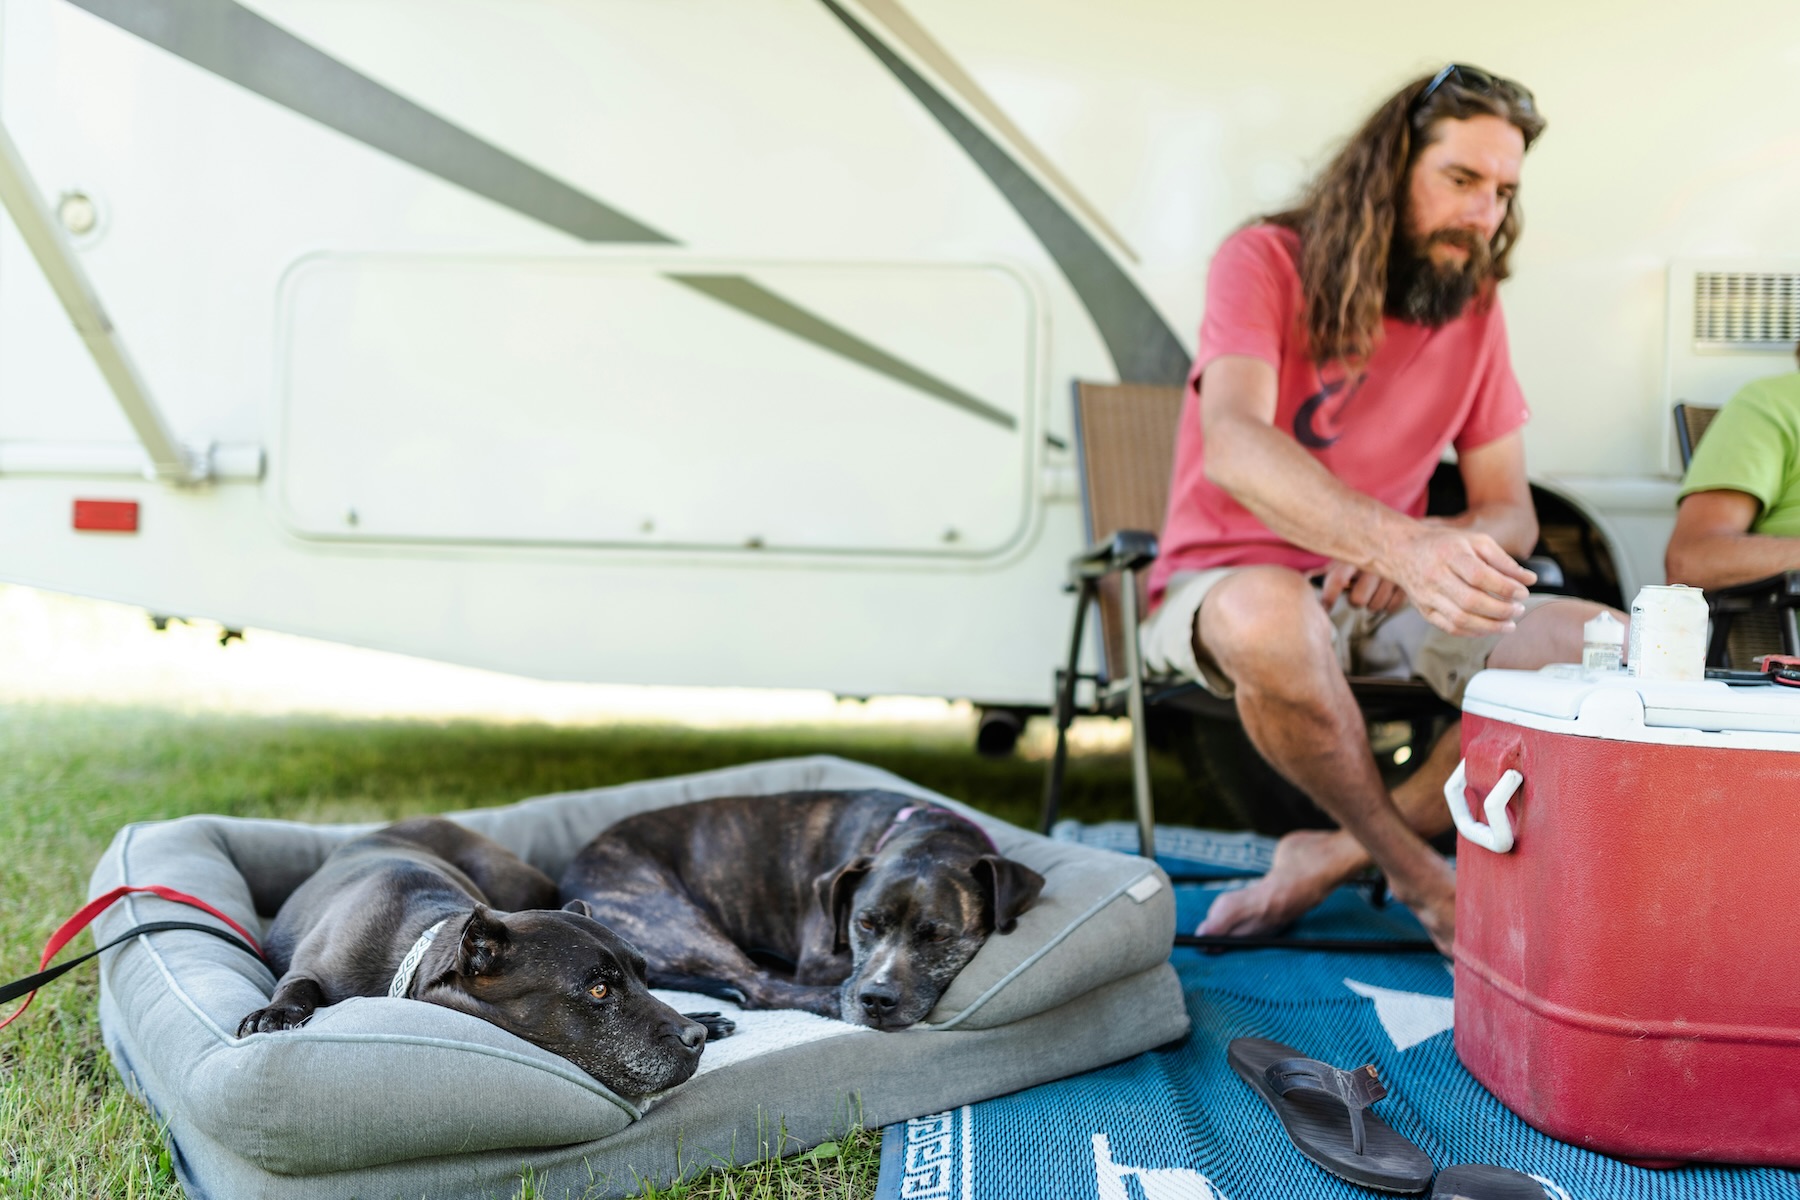 Two dogs lie next to their owner hanging out outside a camper van